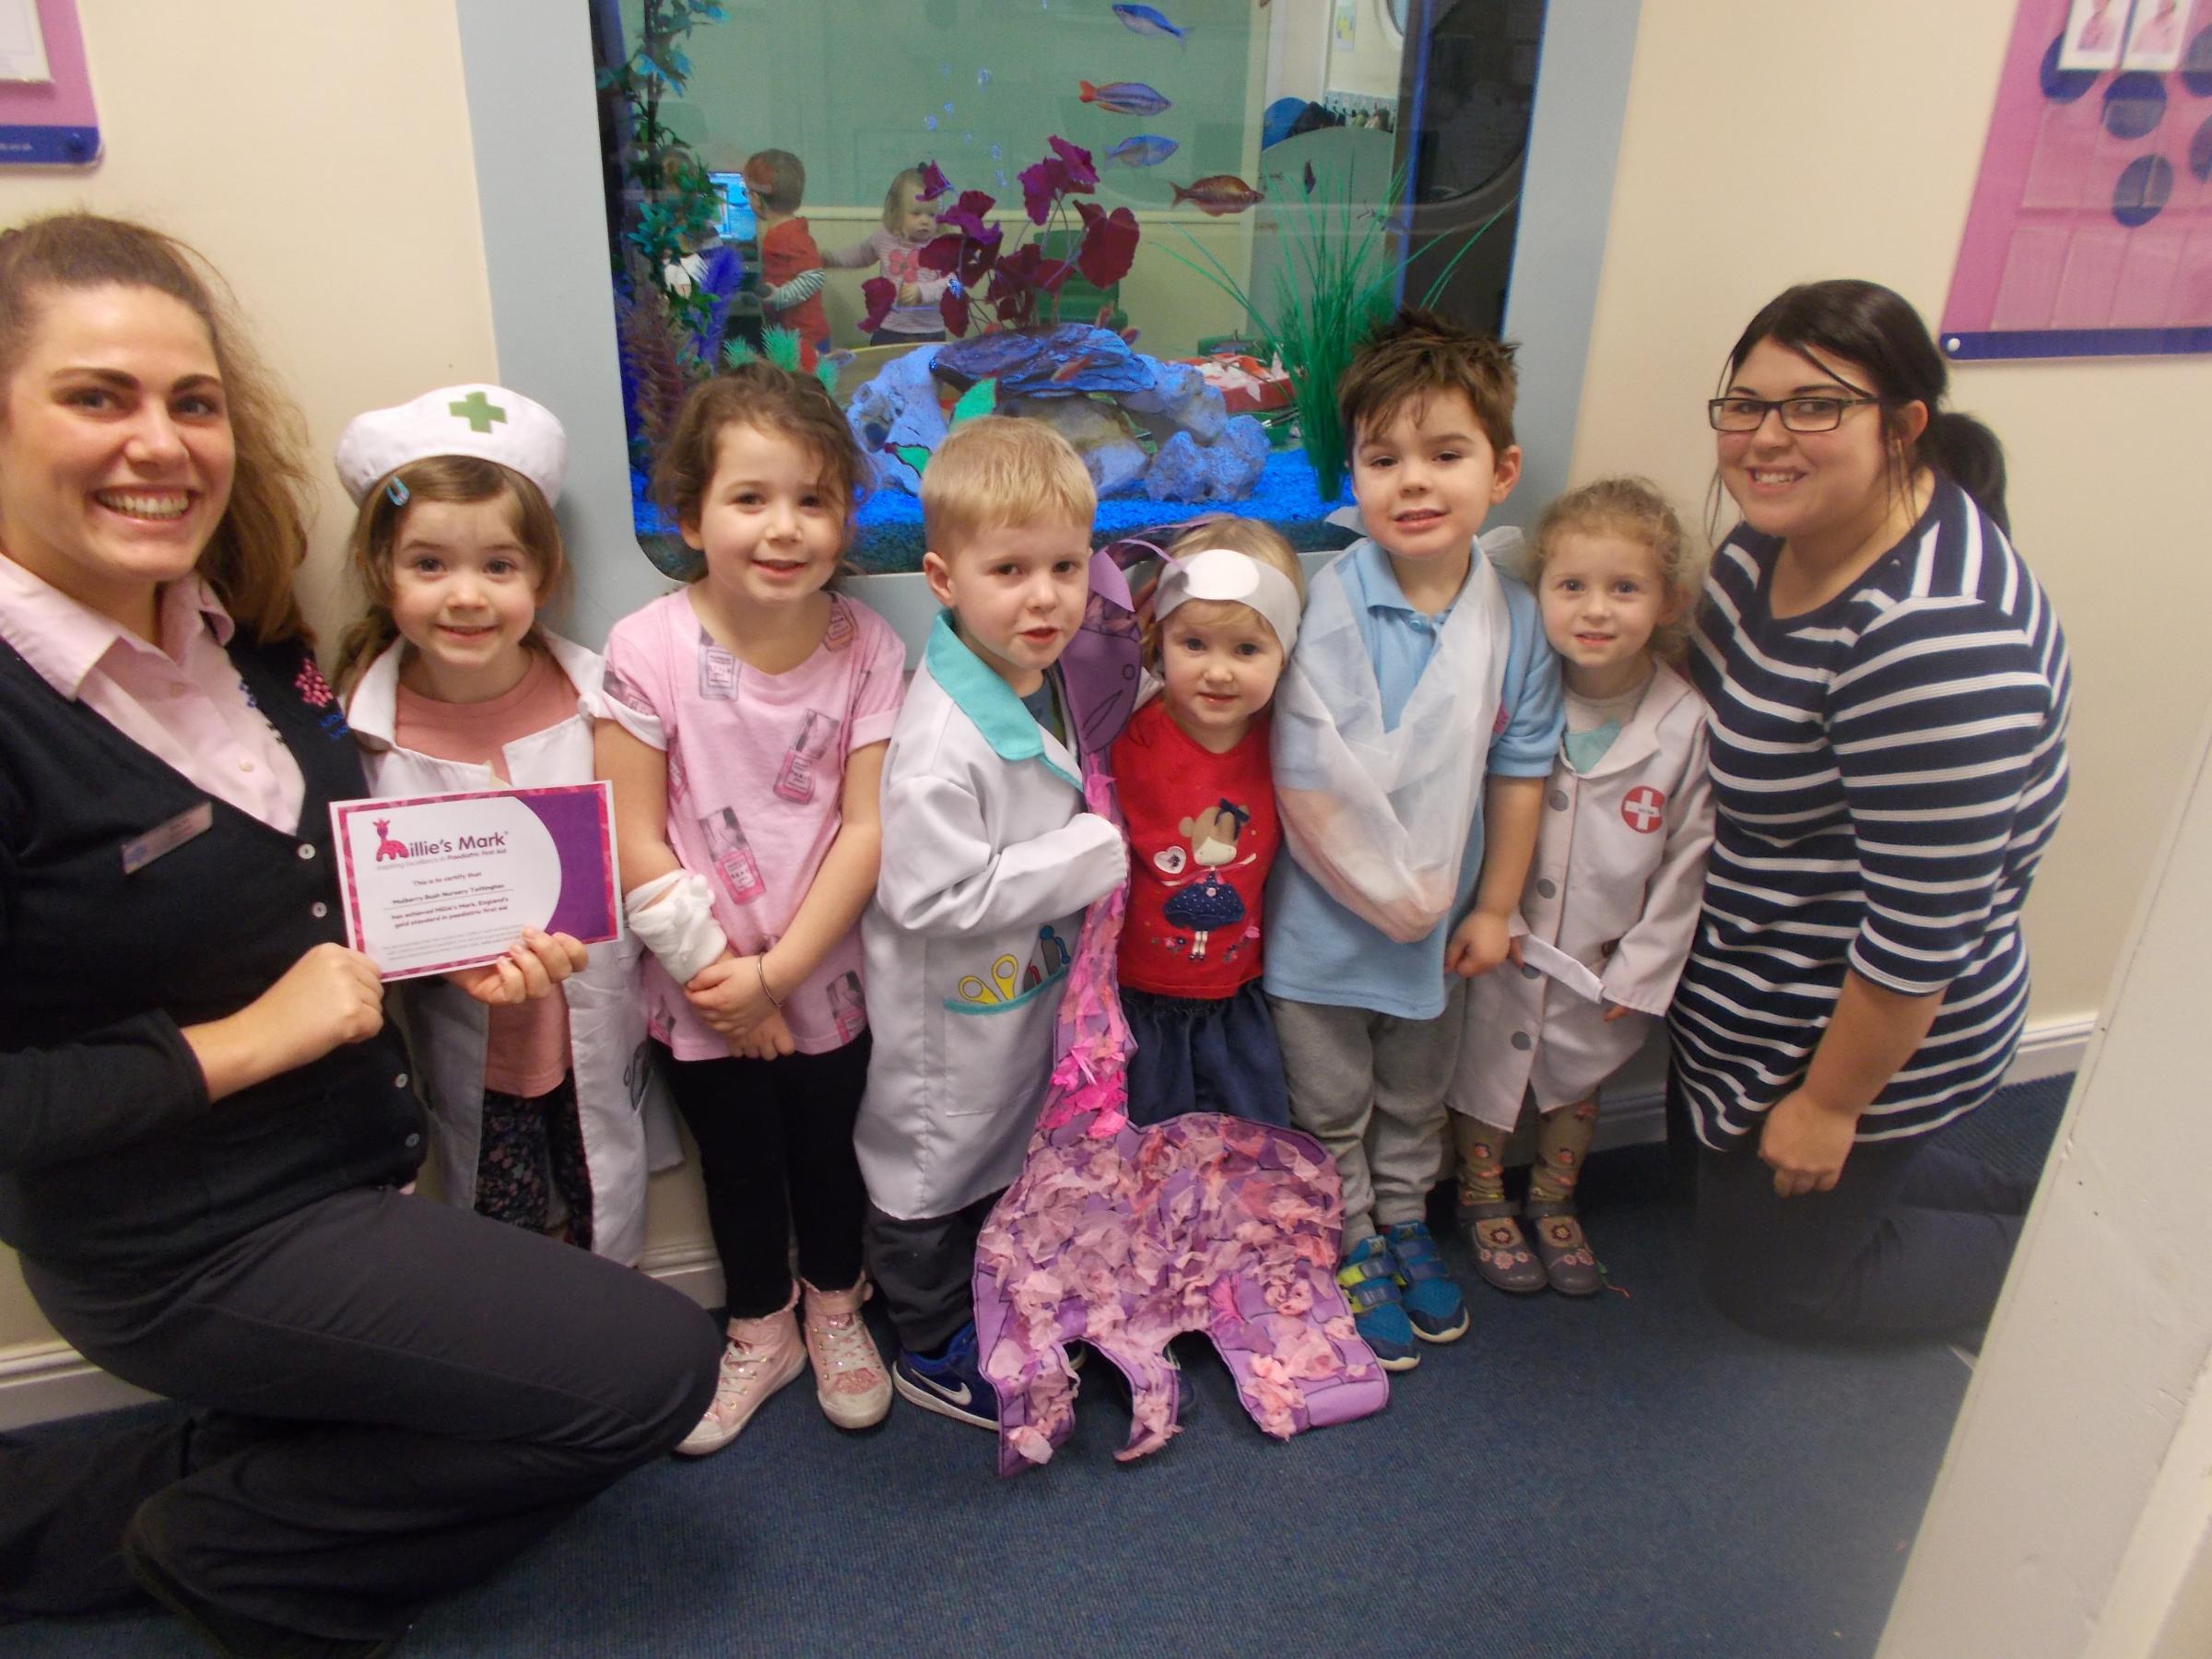 Nursery group is one of first in country to be awarded Millie’s Mark - set up to keep children safe